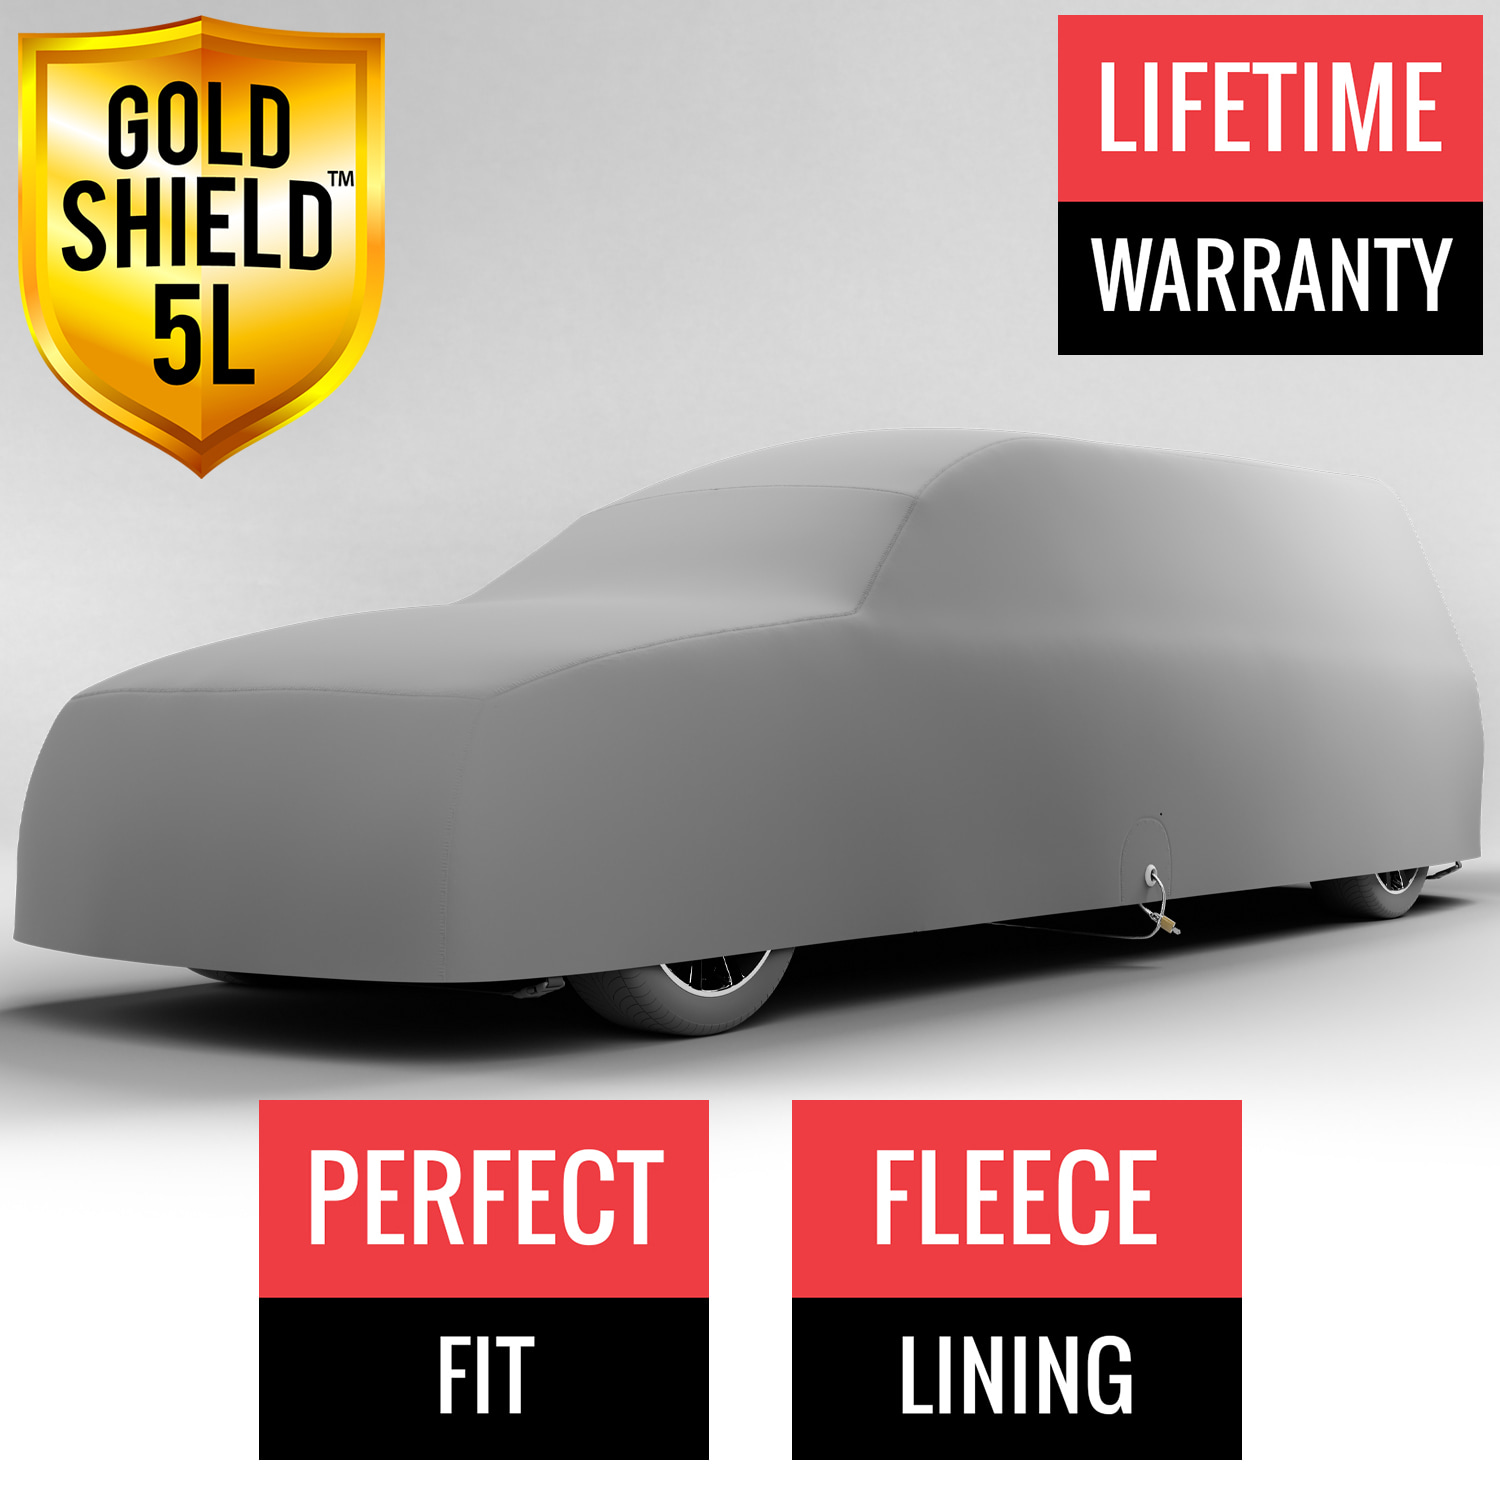 Gold Shield 5L - Cover for Hearse Up to 22 Feet Long